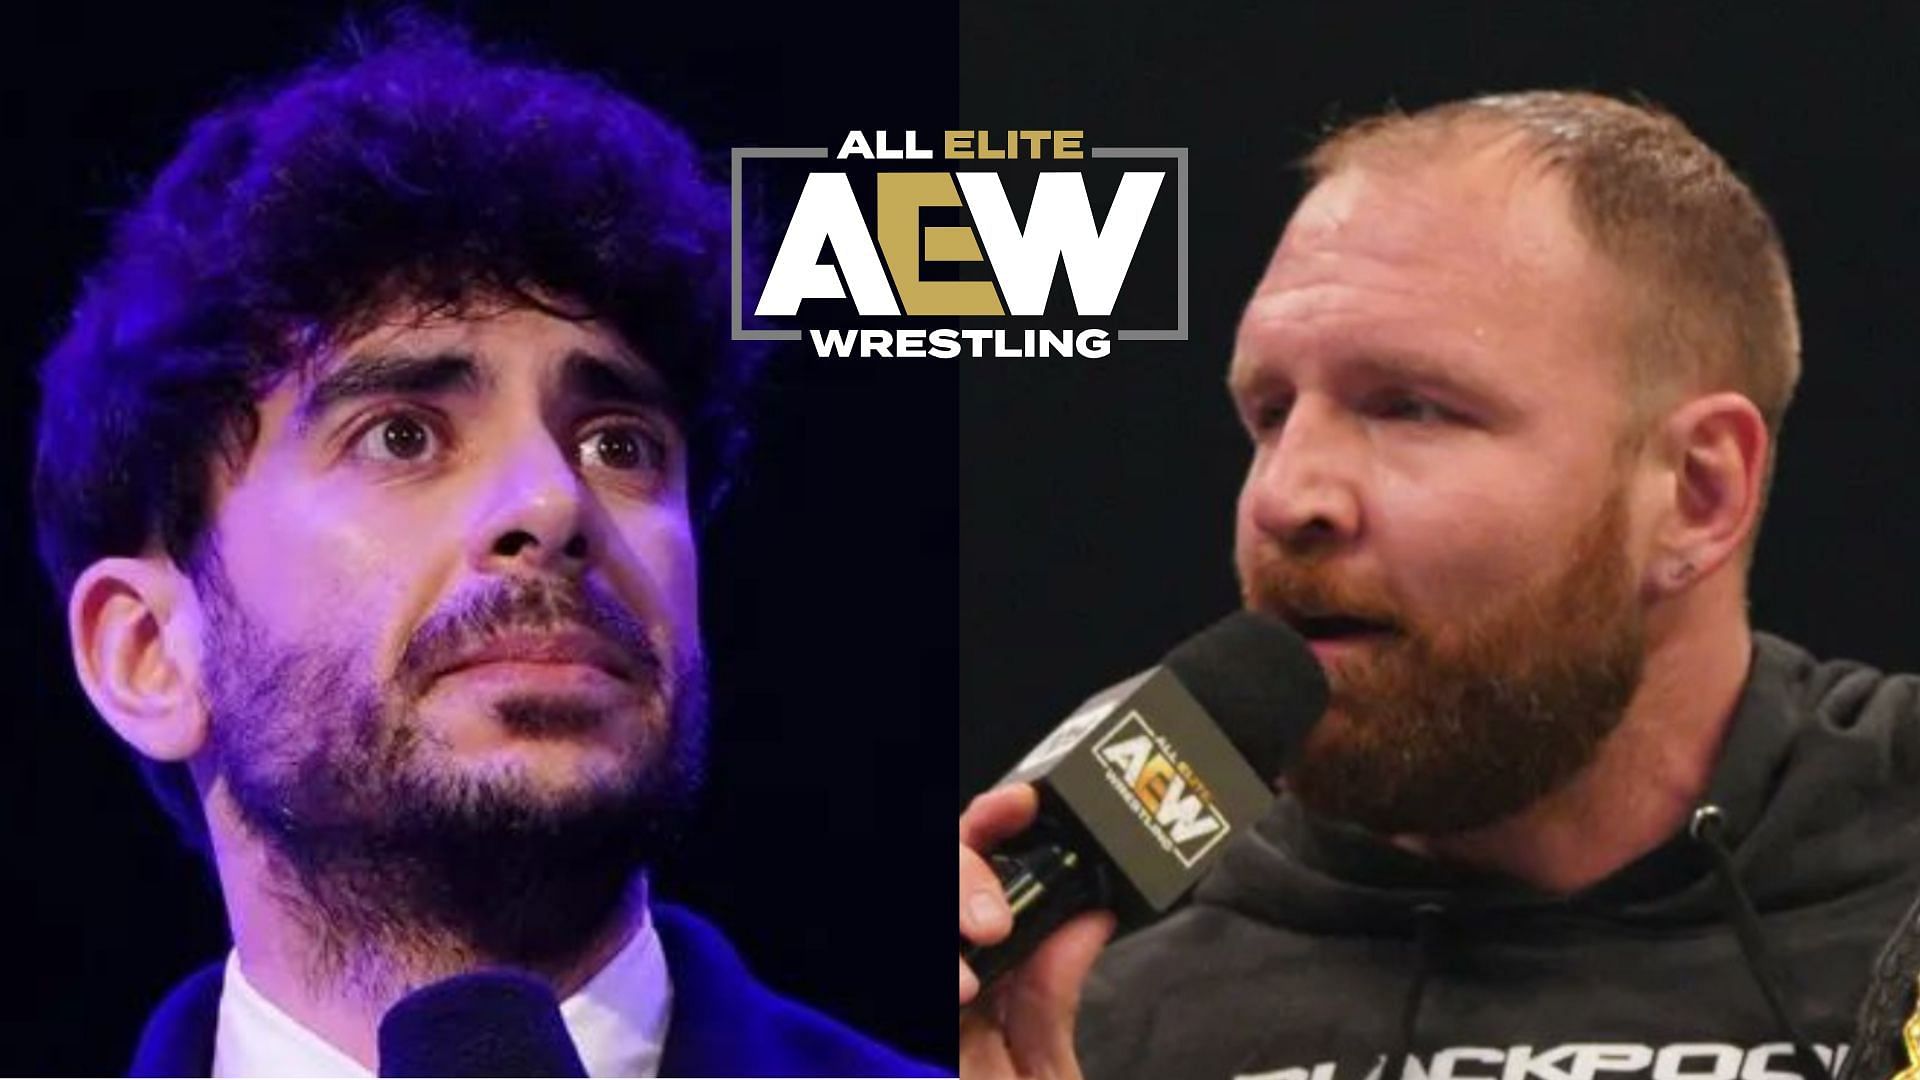 Will Tony Khan keep Jon Moxley from performing in a top US promotion?